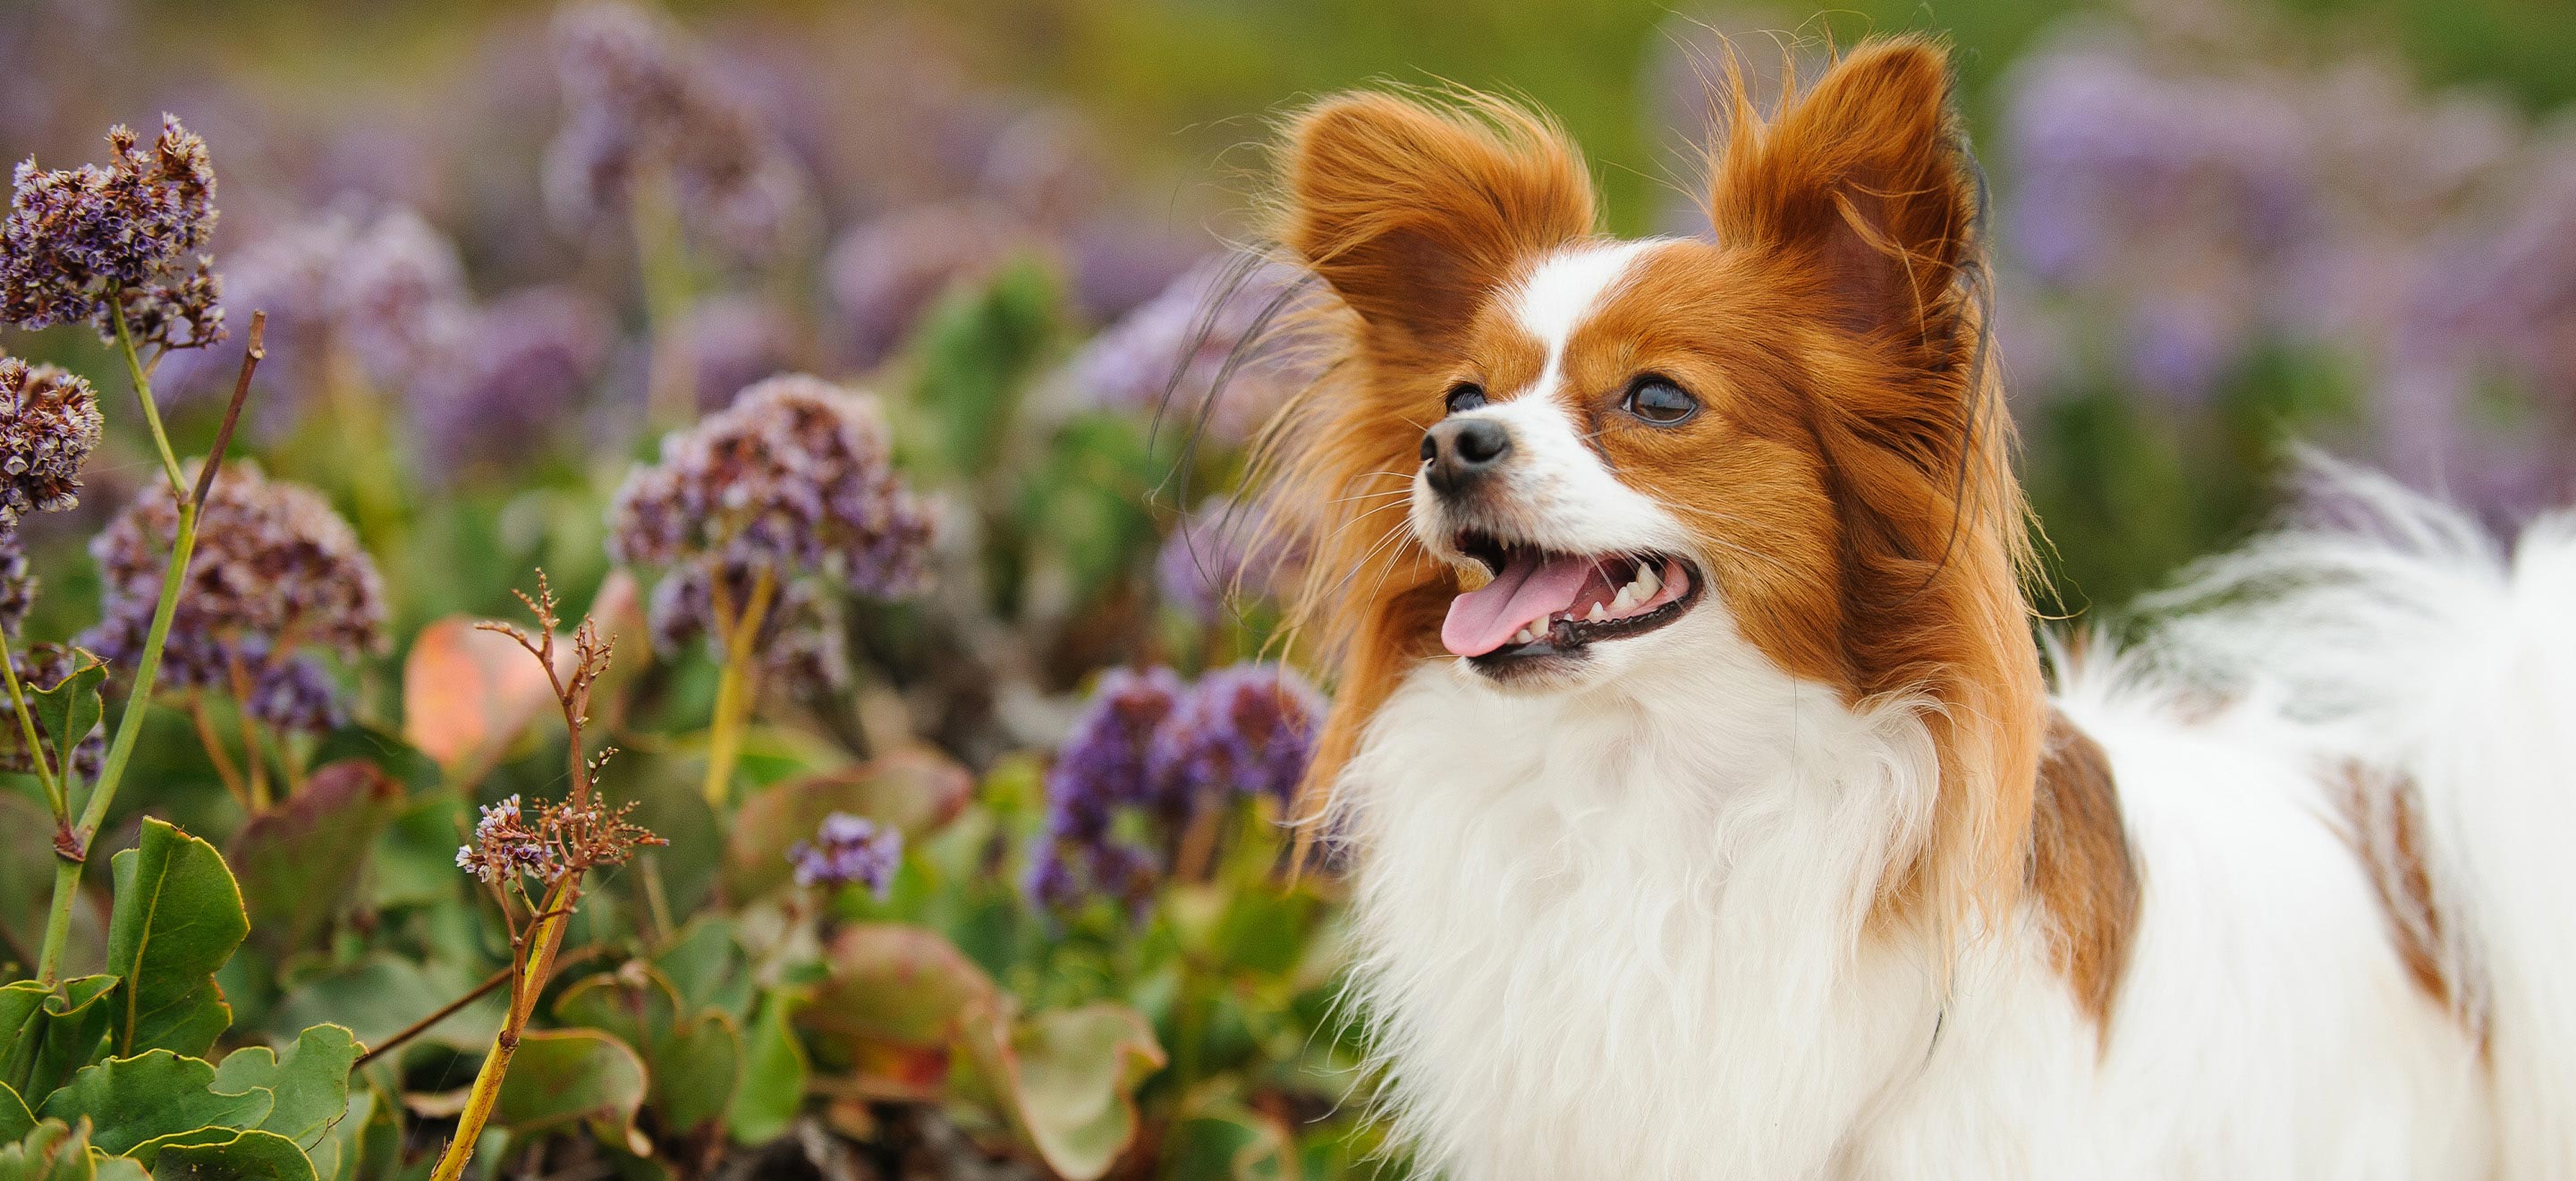 Cute Papillon puppy with brown ears  image